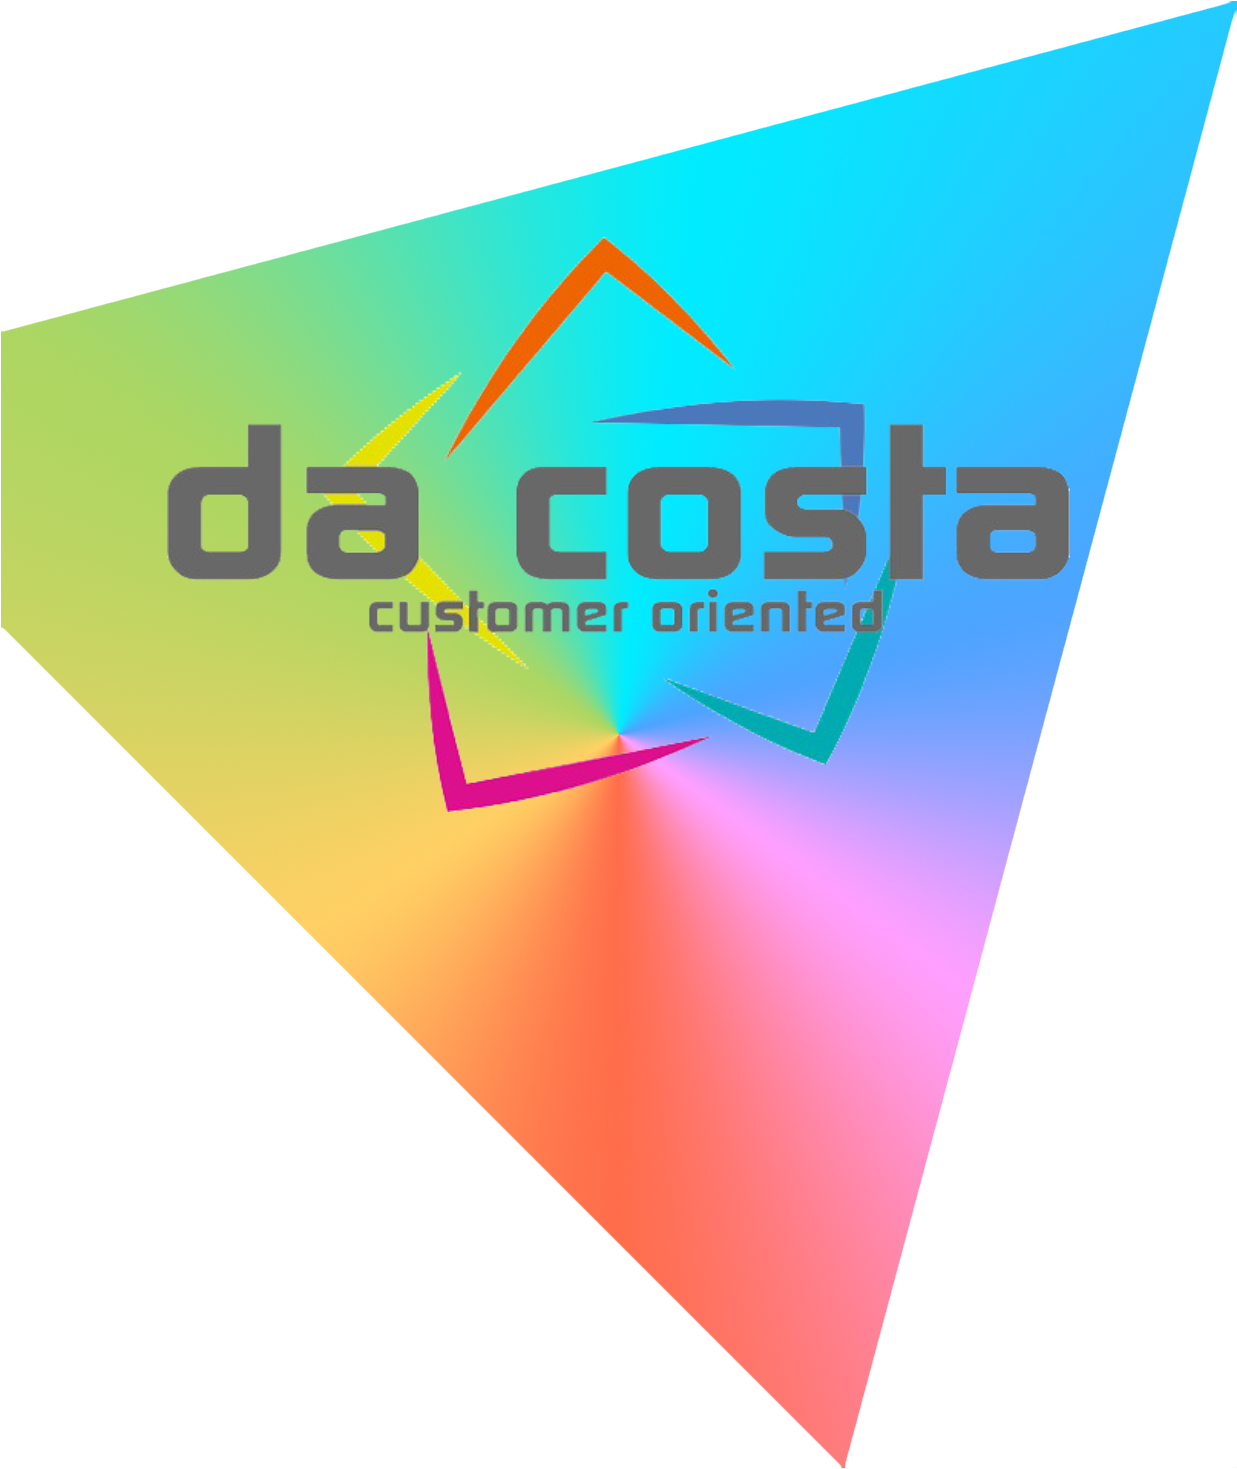 https://www.dacosta.it/wp/wp-content/uploads/2020/09/dacosta-customer-oriented.png